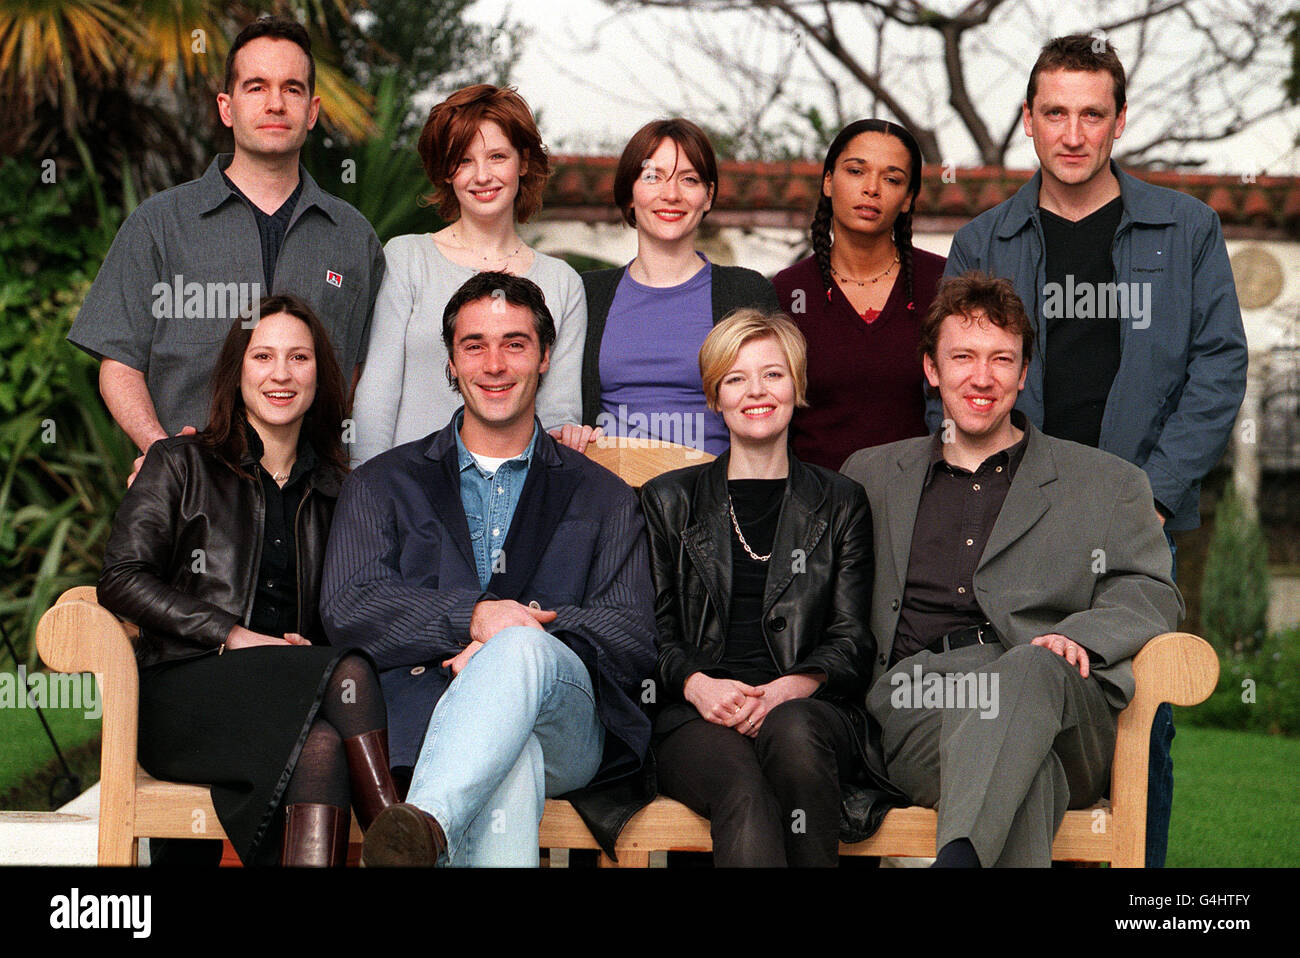 The stars of 'Wonderful You', a new drama series for the ITV network: (back row, from left) William Osbourne, Kelly Reilly, Anna Wilson- Jones, Rowena King, Dorian Healy, (front row, from left) Miranda Pleasence, Greg Wise, Lucy Akhurst and Richard Lumsden. Stock Photo